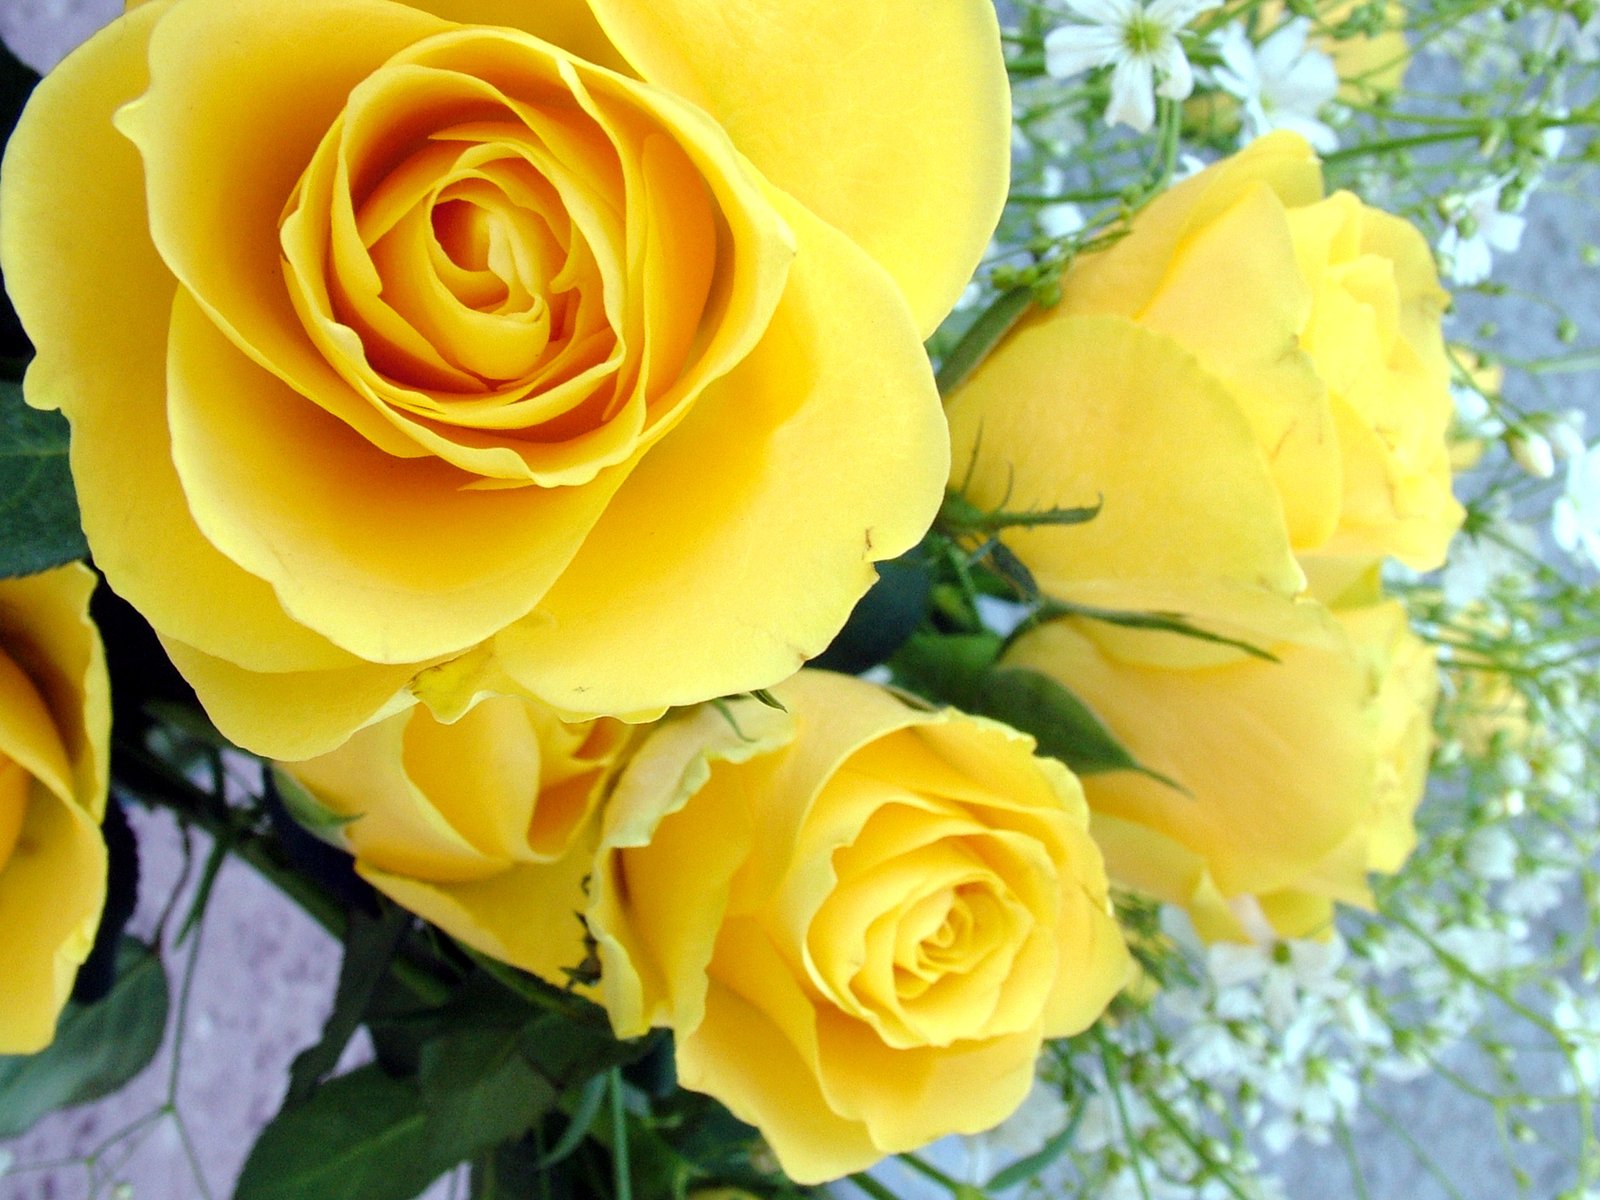 Yellow Rose Flower Images Download - Beautiful Flower Images Download - rose wallpaper Rose Flower Images Download - NeotericIT.com